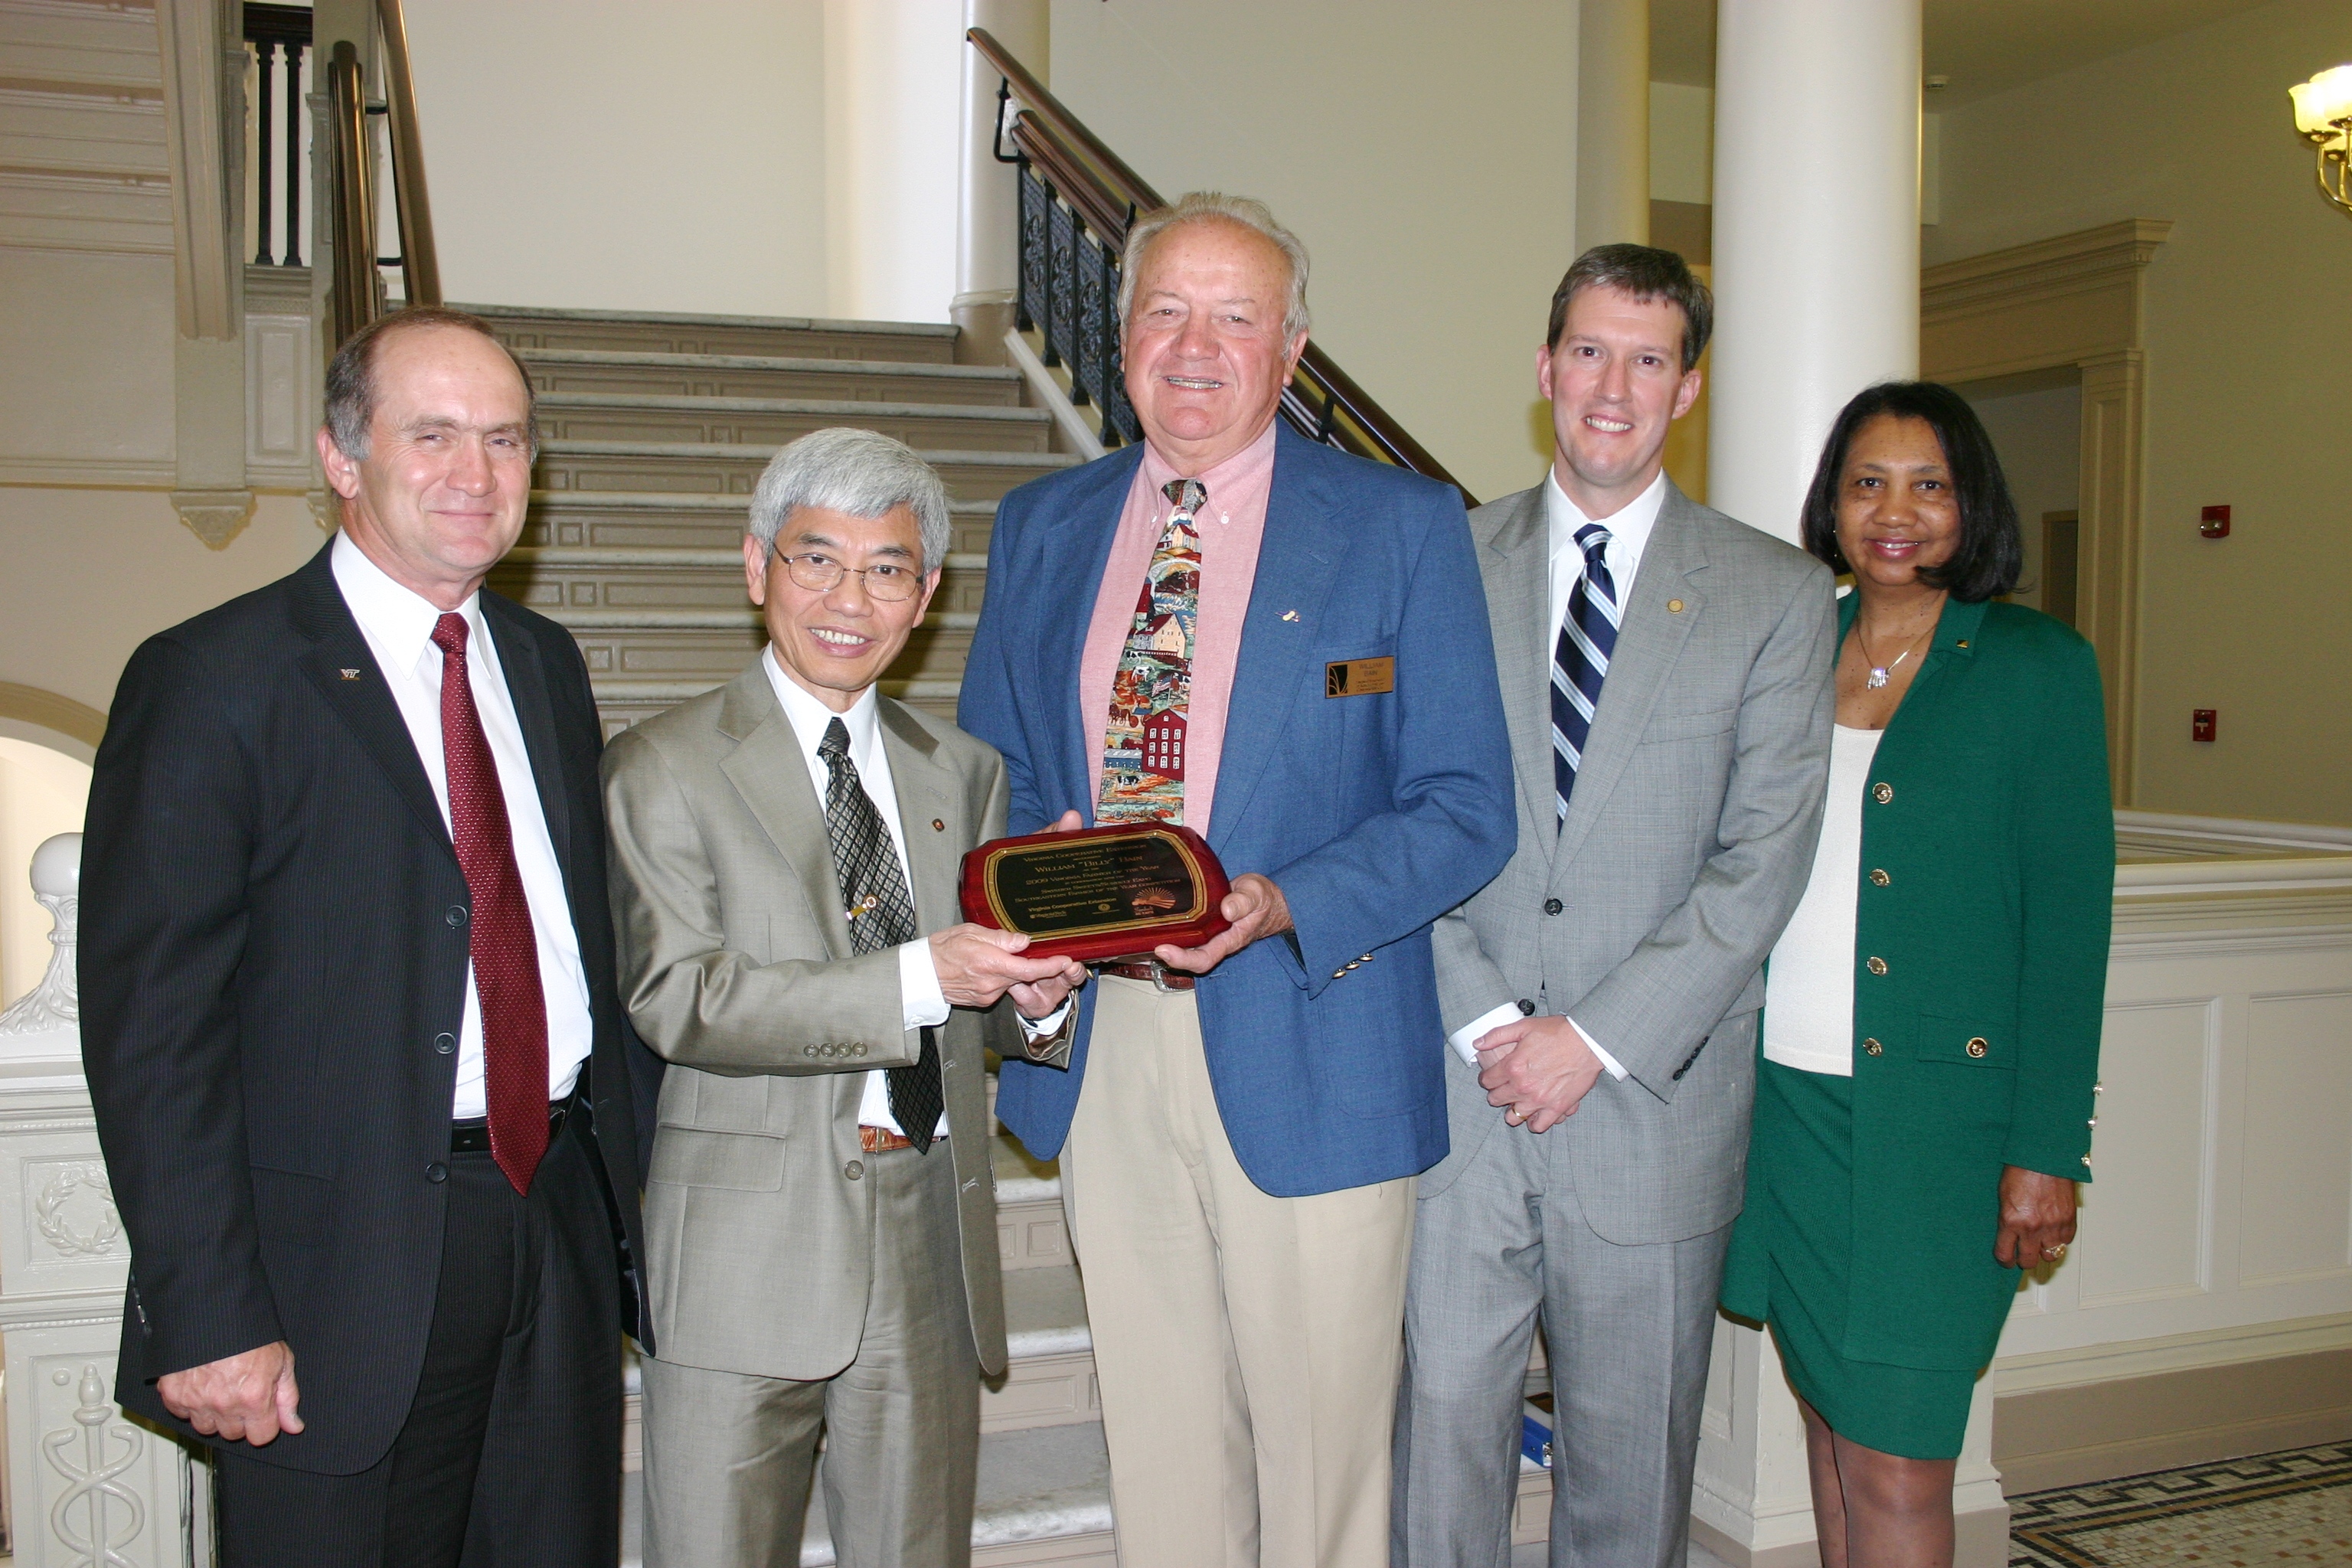 Virginia Cooperative Extension recognized William “Billy” Bain, of Dinwiddie (center) as the 2009 Virginia Farmer of the Year at a meeting of the Virginia Board of Agriculture and Consumer Services on May 21 in Richmond. Pictured from left to right: Jim Riddell, assistant director of agriculture and natural resources for Virginia Cooperative Extension; Loke Kok, interim dean of the College of Agriculture and Life Sciences; Billy Bain; Todd Haymore, commissioner of the Virginia Department of Agr